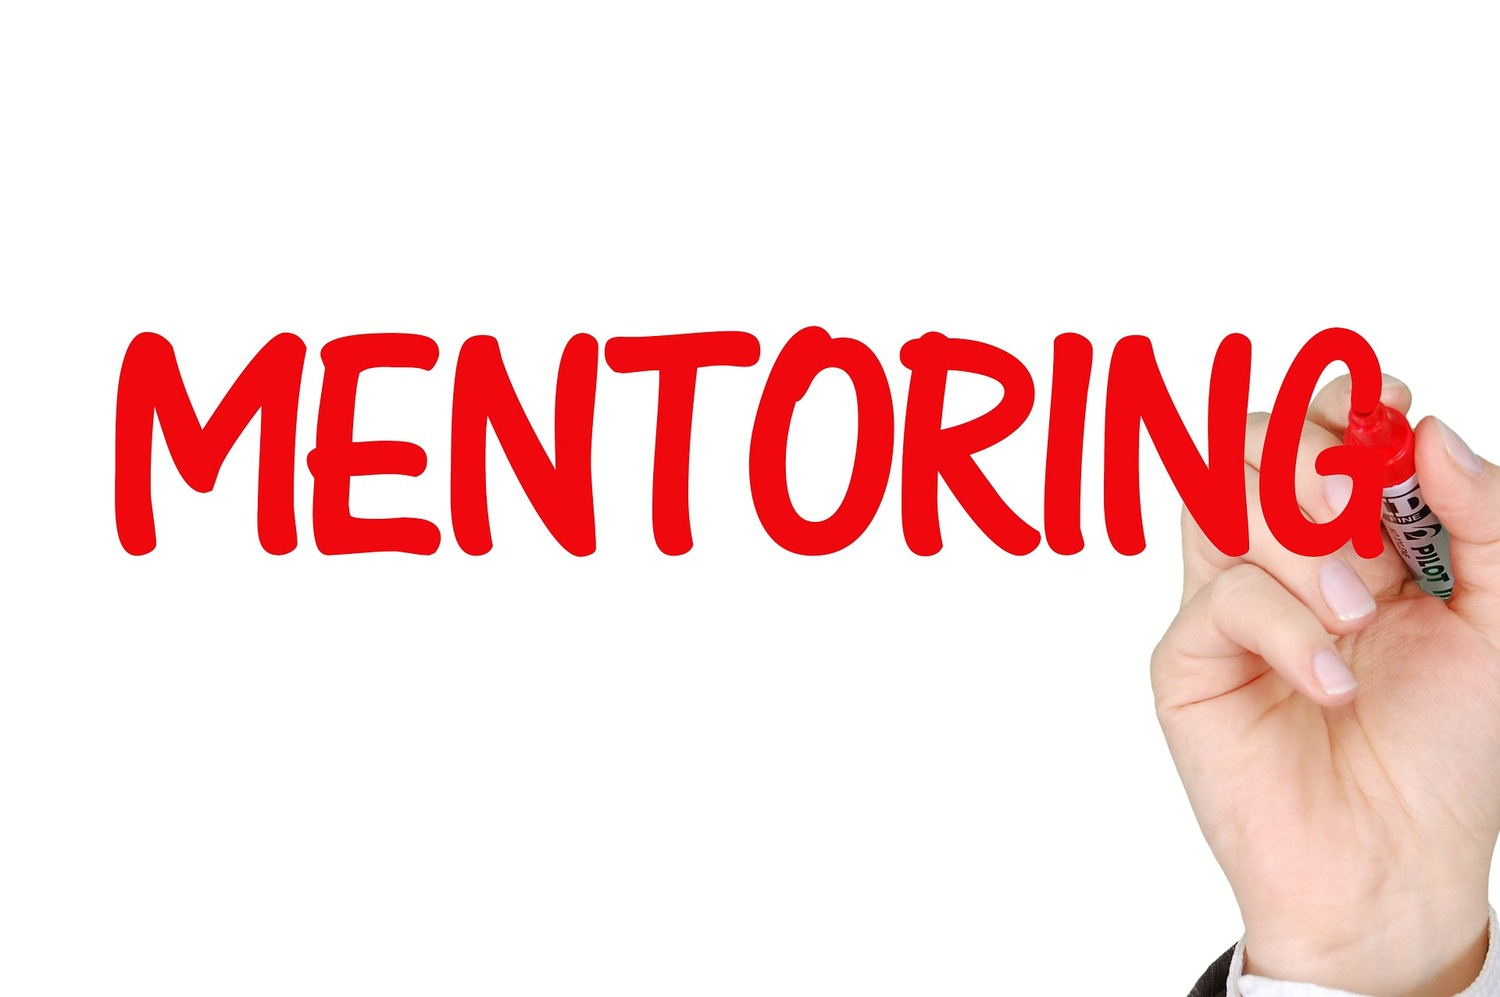 <span style="font-weight: bold;">Mentoring</span>&nbsp;